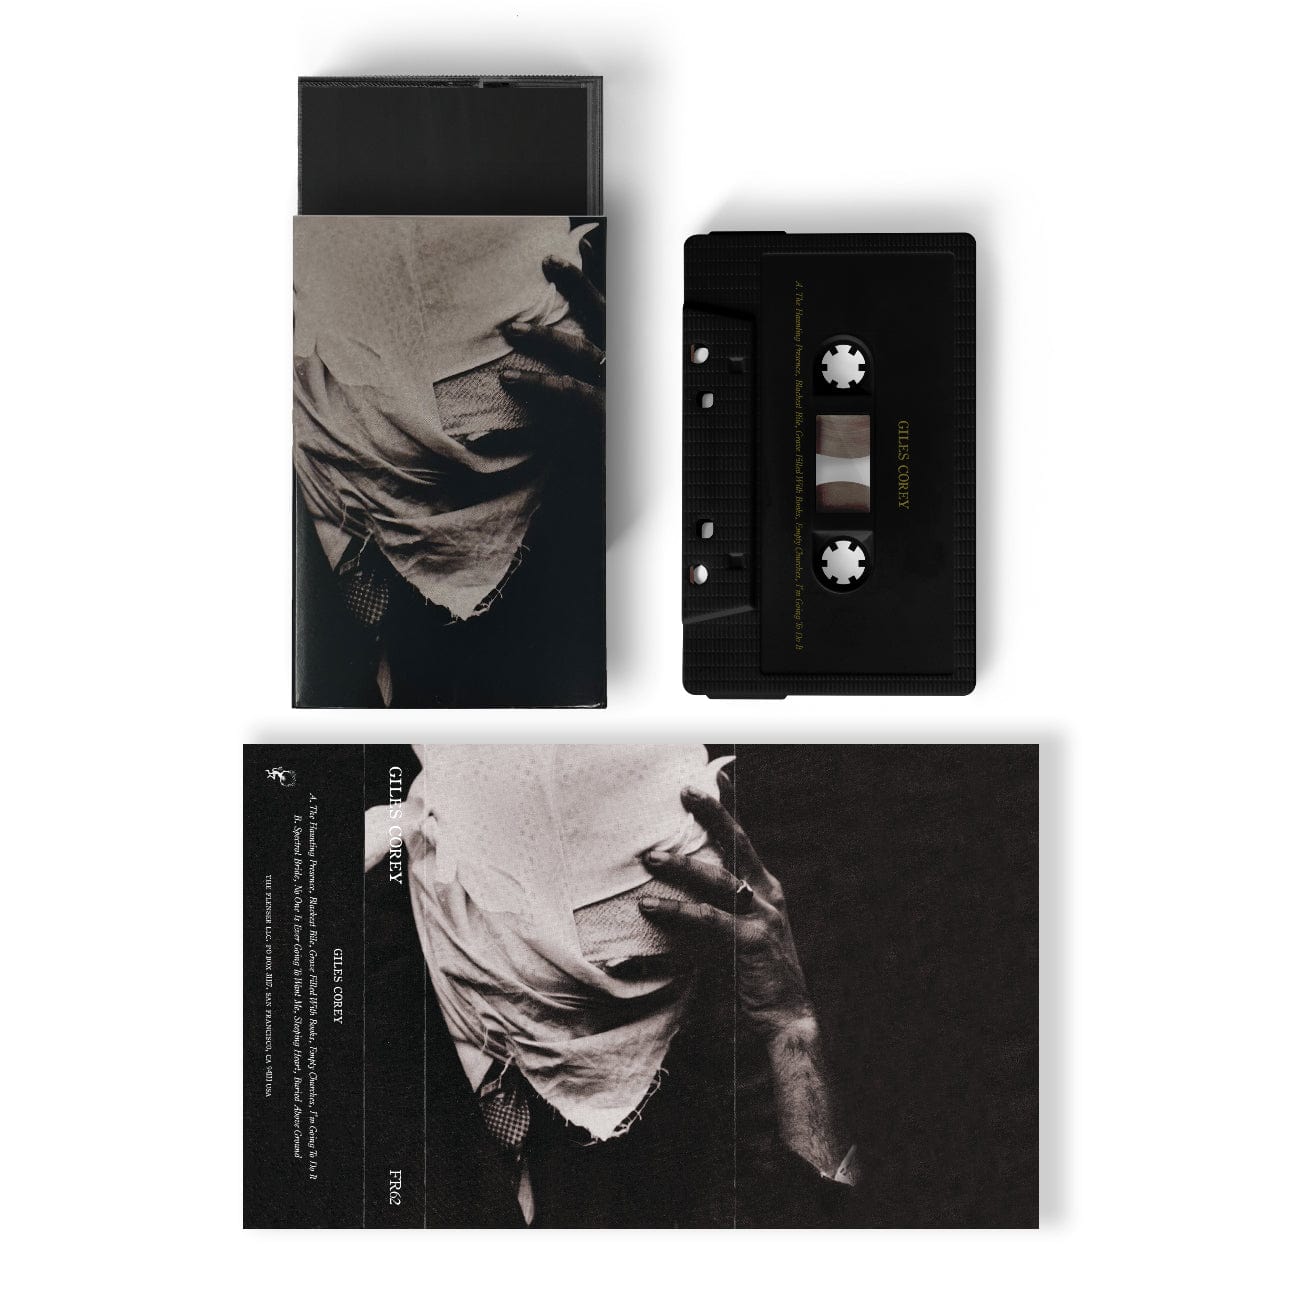 The Flenser Tapes Giles Corey "Giles Corey" Tape